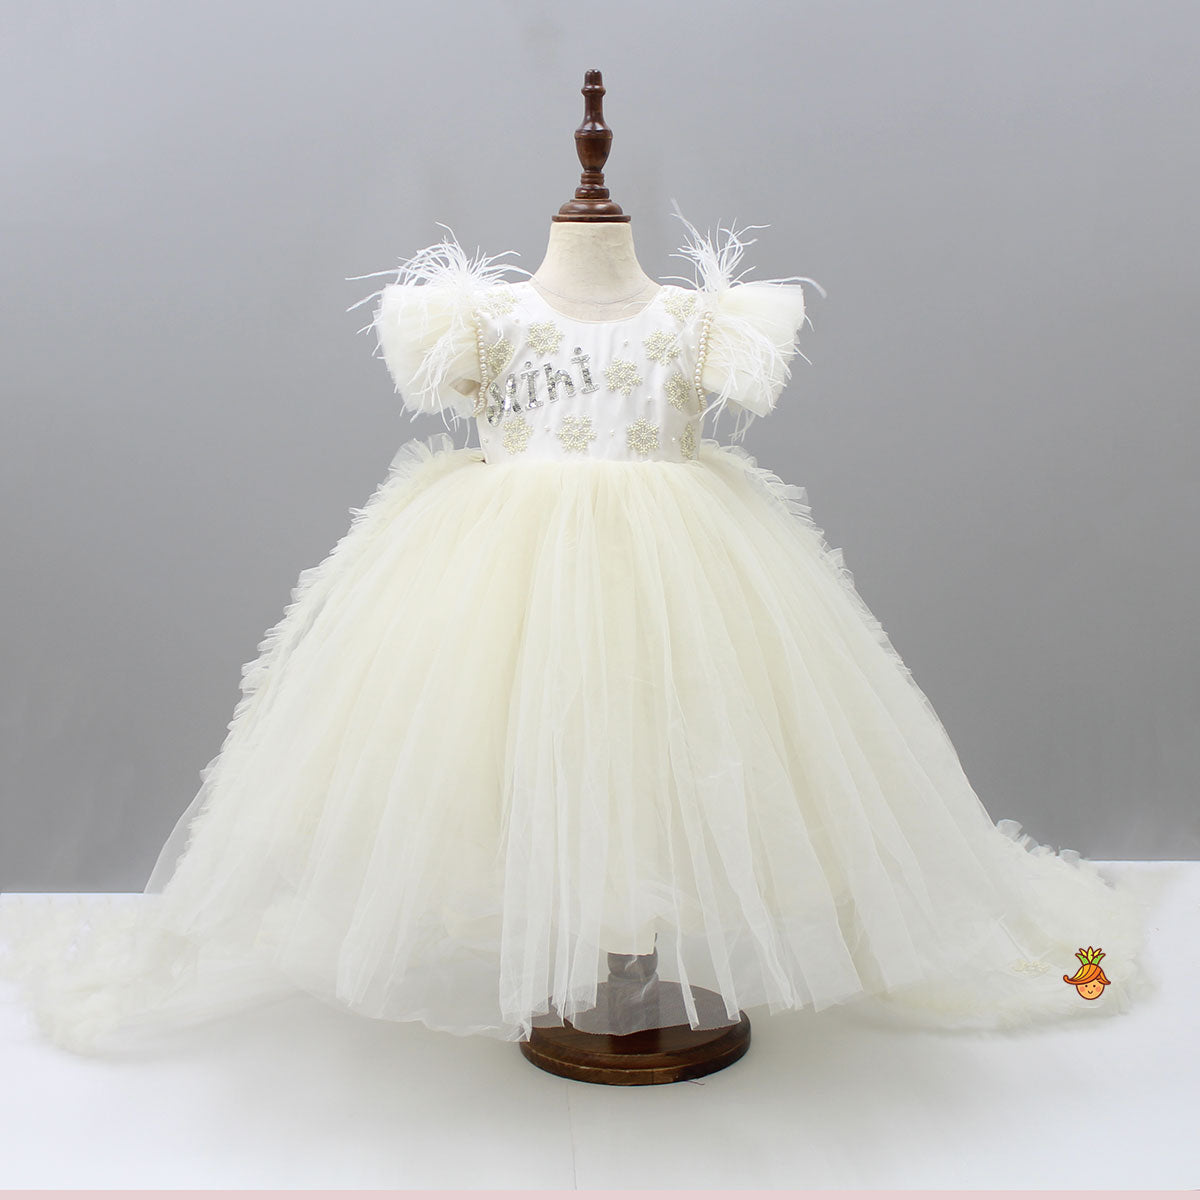 Name Customized Elegant Frilly Sleeves and Pearl Embellished Gown With Detachable Trail